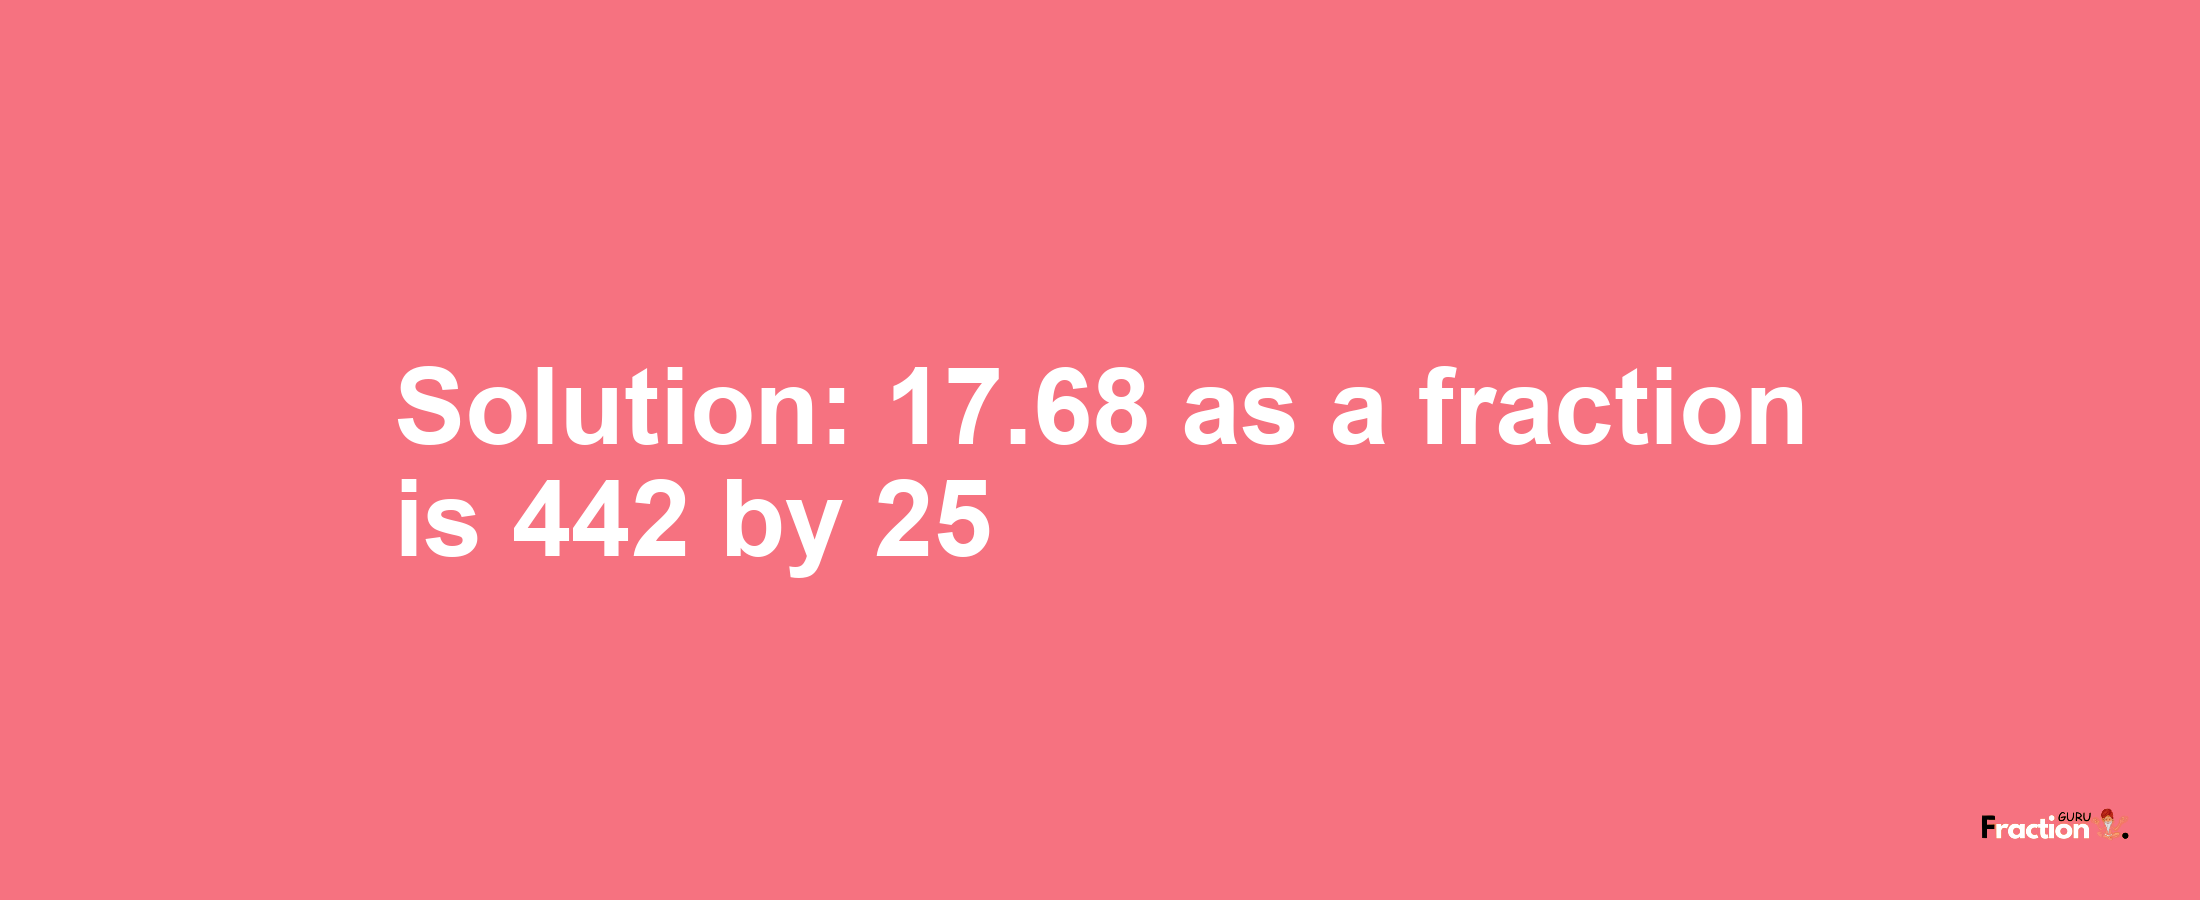 Solution:17.68 as a fraction is 442/25